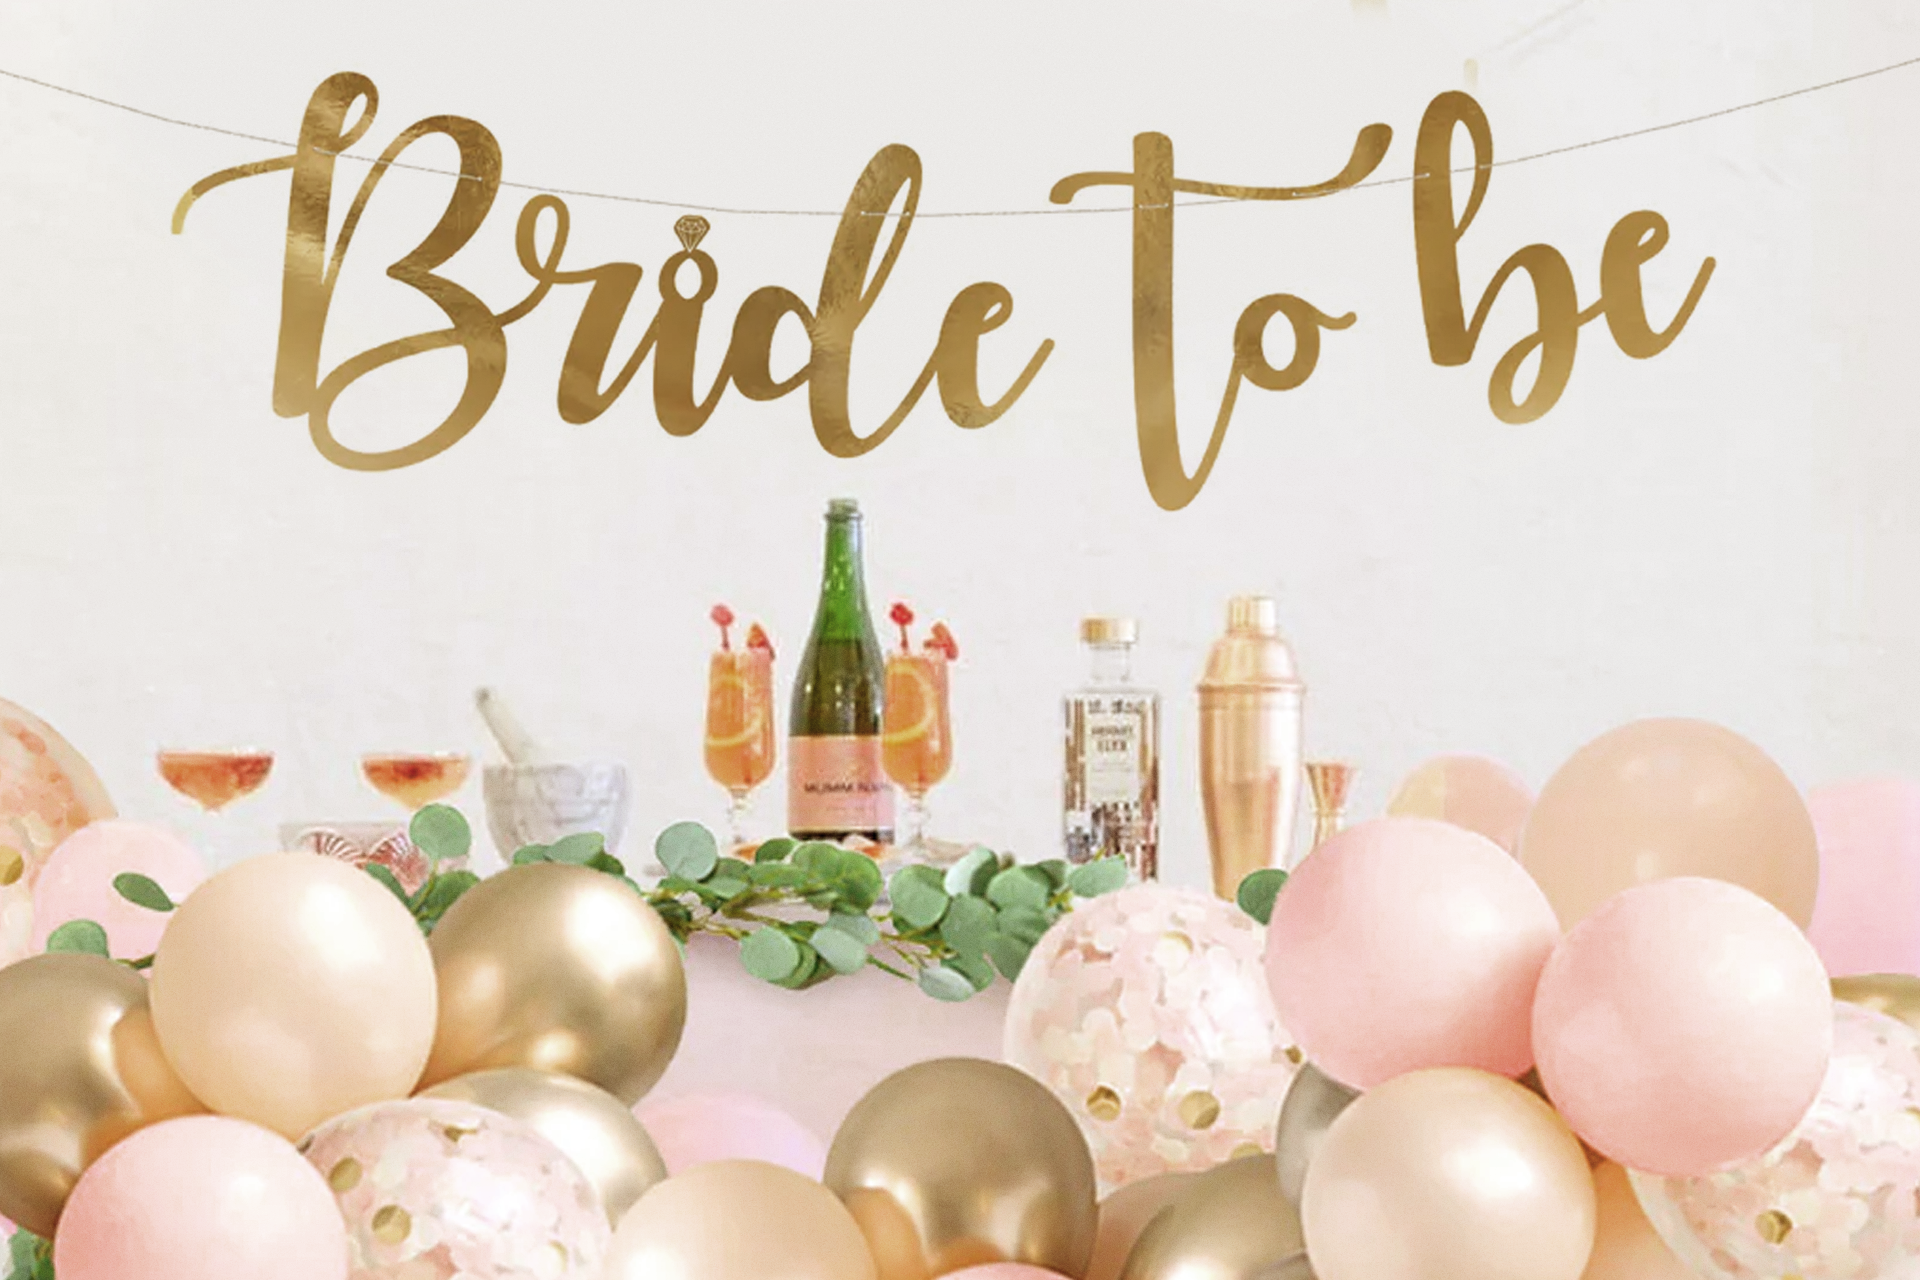 Bridal Shower Decoration Ideas: The Ultimate Guide to Planning a Memorable Party